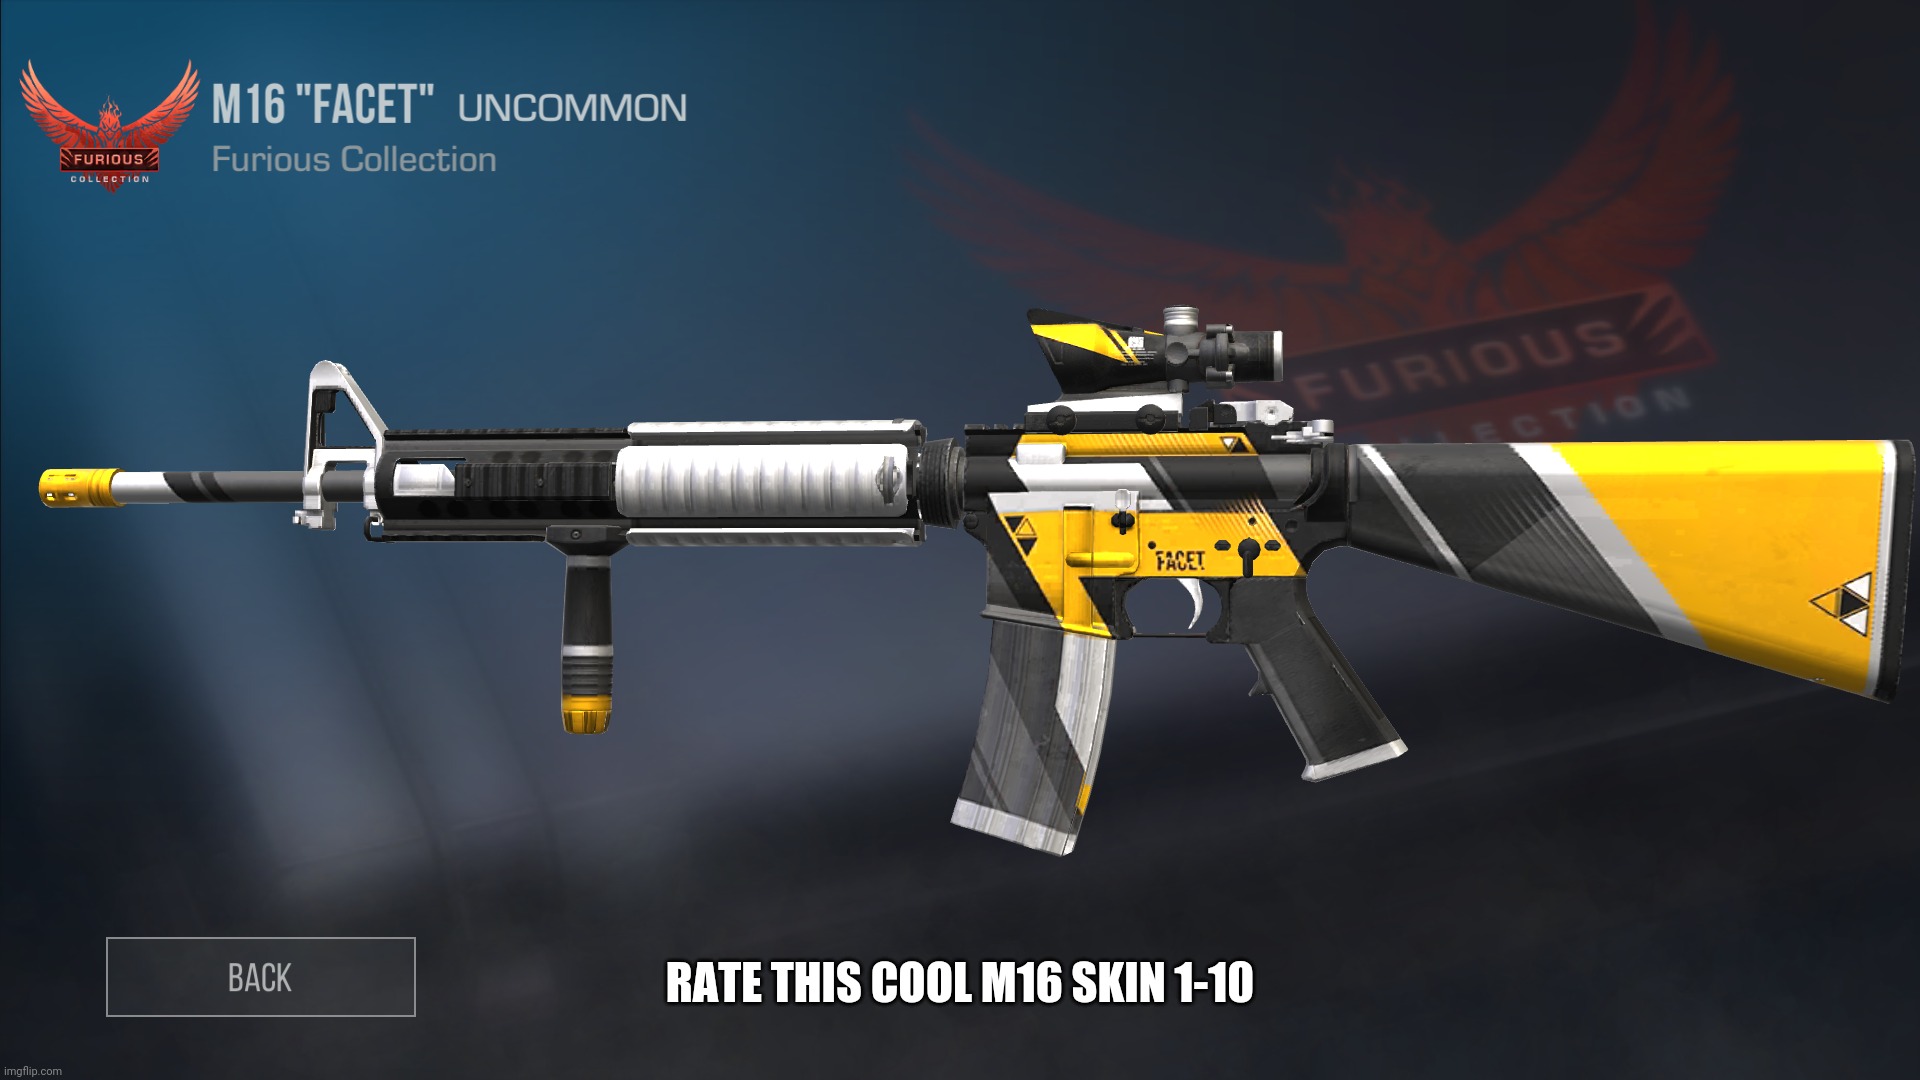 RATE THIS COOL M16 SKIN 1-10 | made w/ Imgflip meme maker